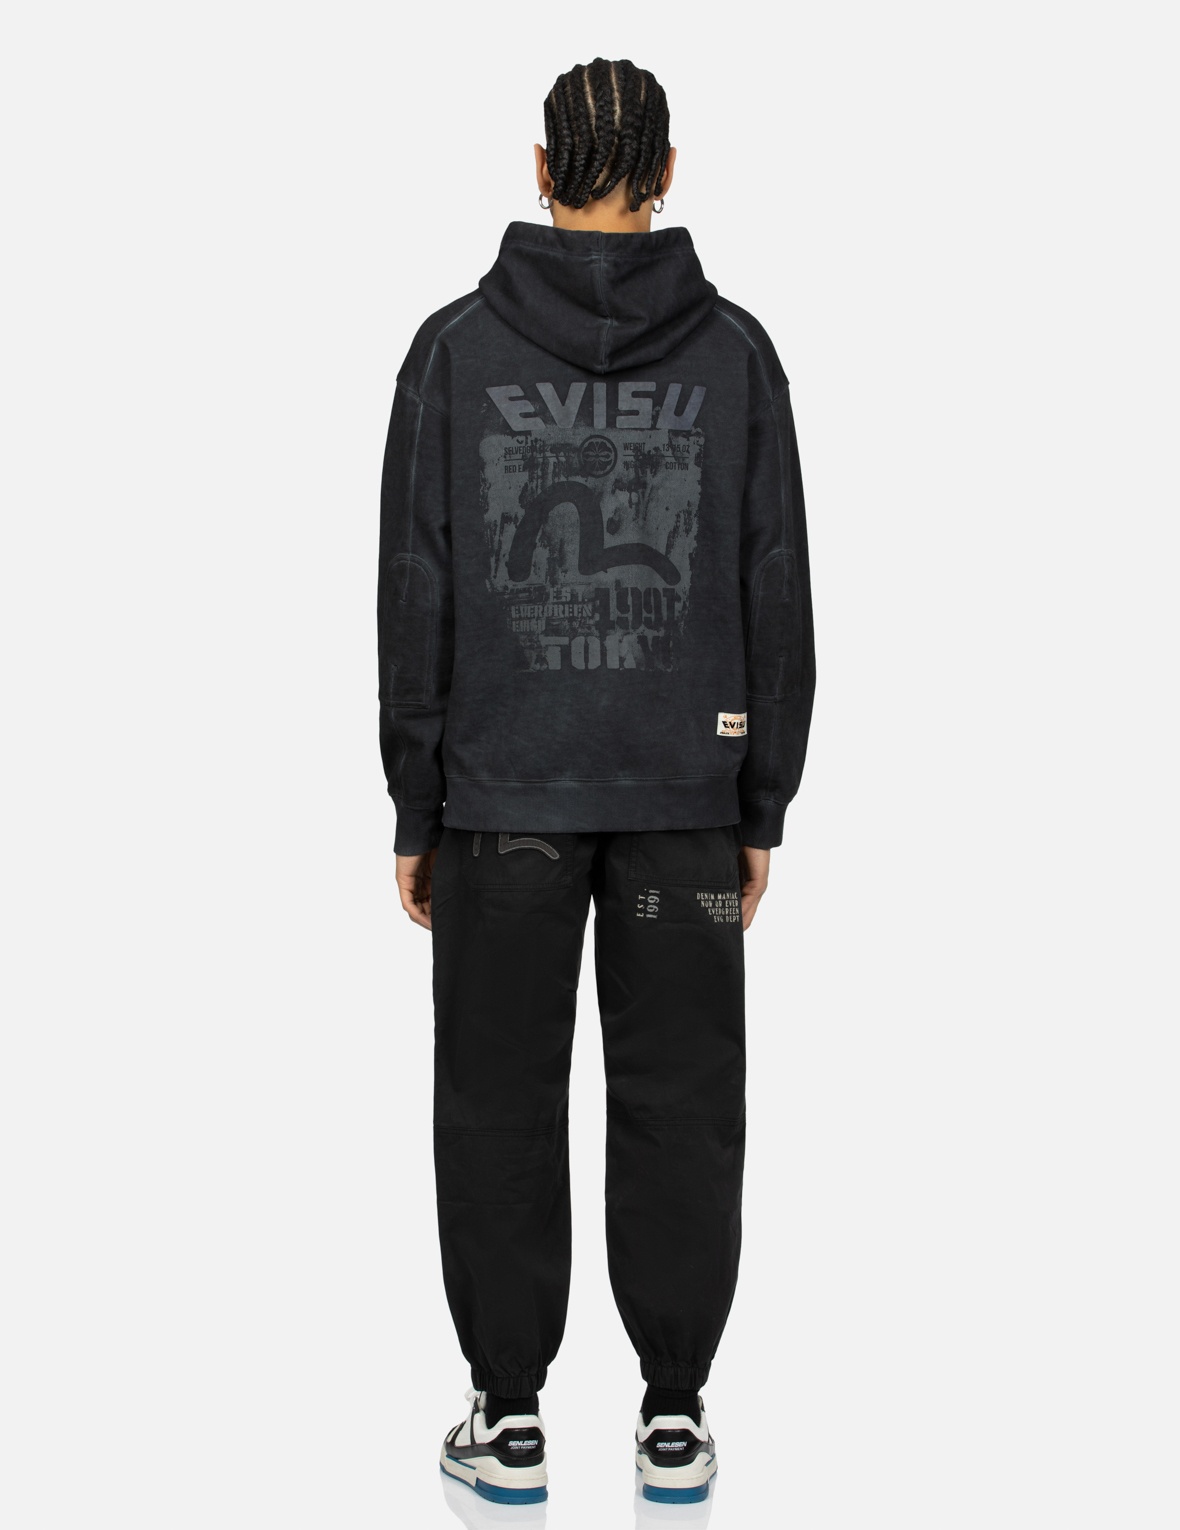 SEAGULL AND LOGO PRINT RELAX FIT HOODIE - 5